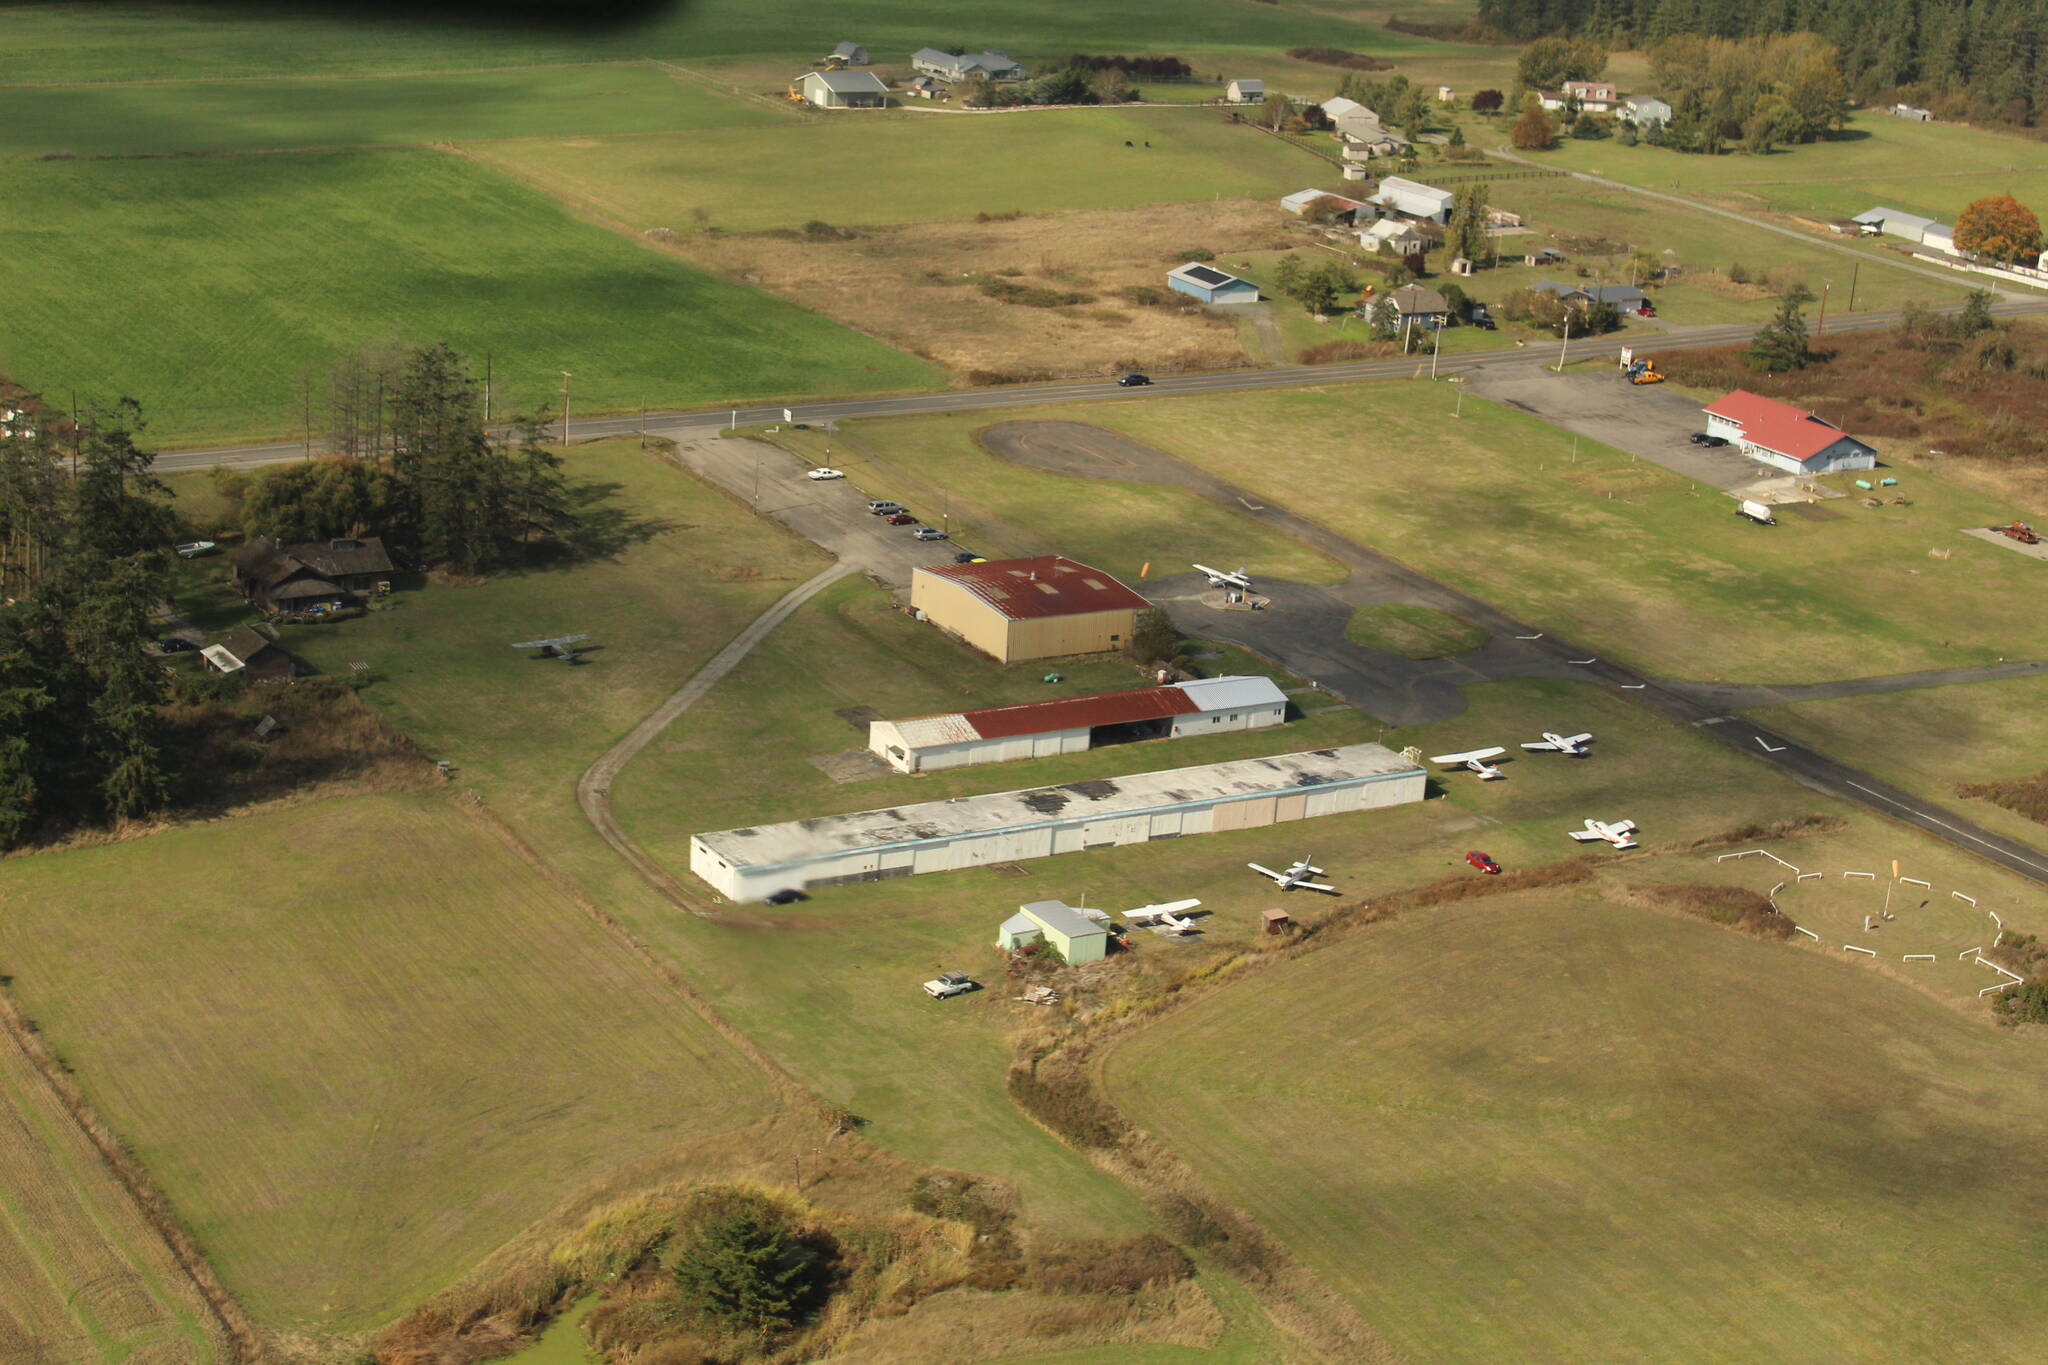 File photo by Karina Andrew/Whidbey News-Times
The A.J. Eisenberg Airport has received plenty of interest but little traction since the property went up for sale last summer.